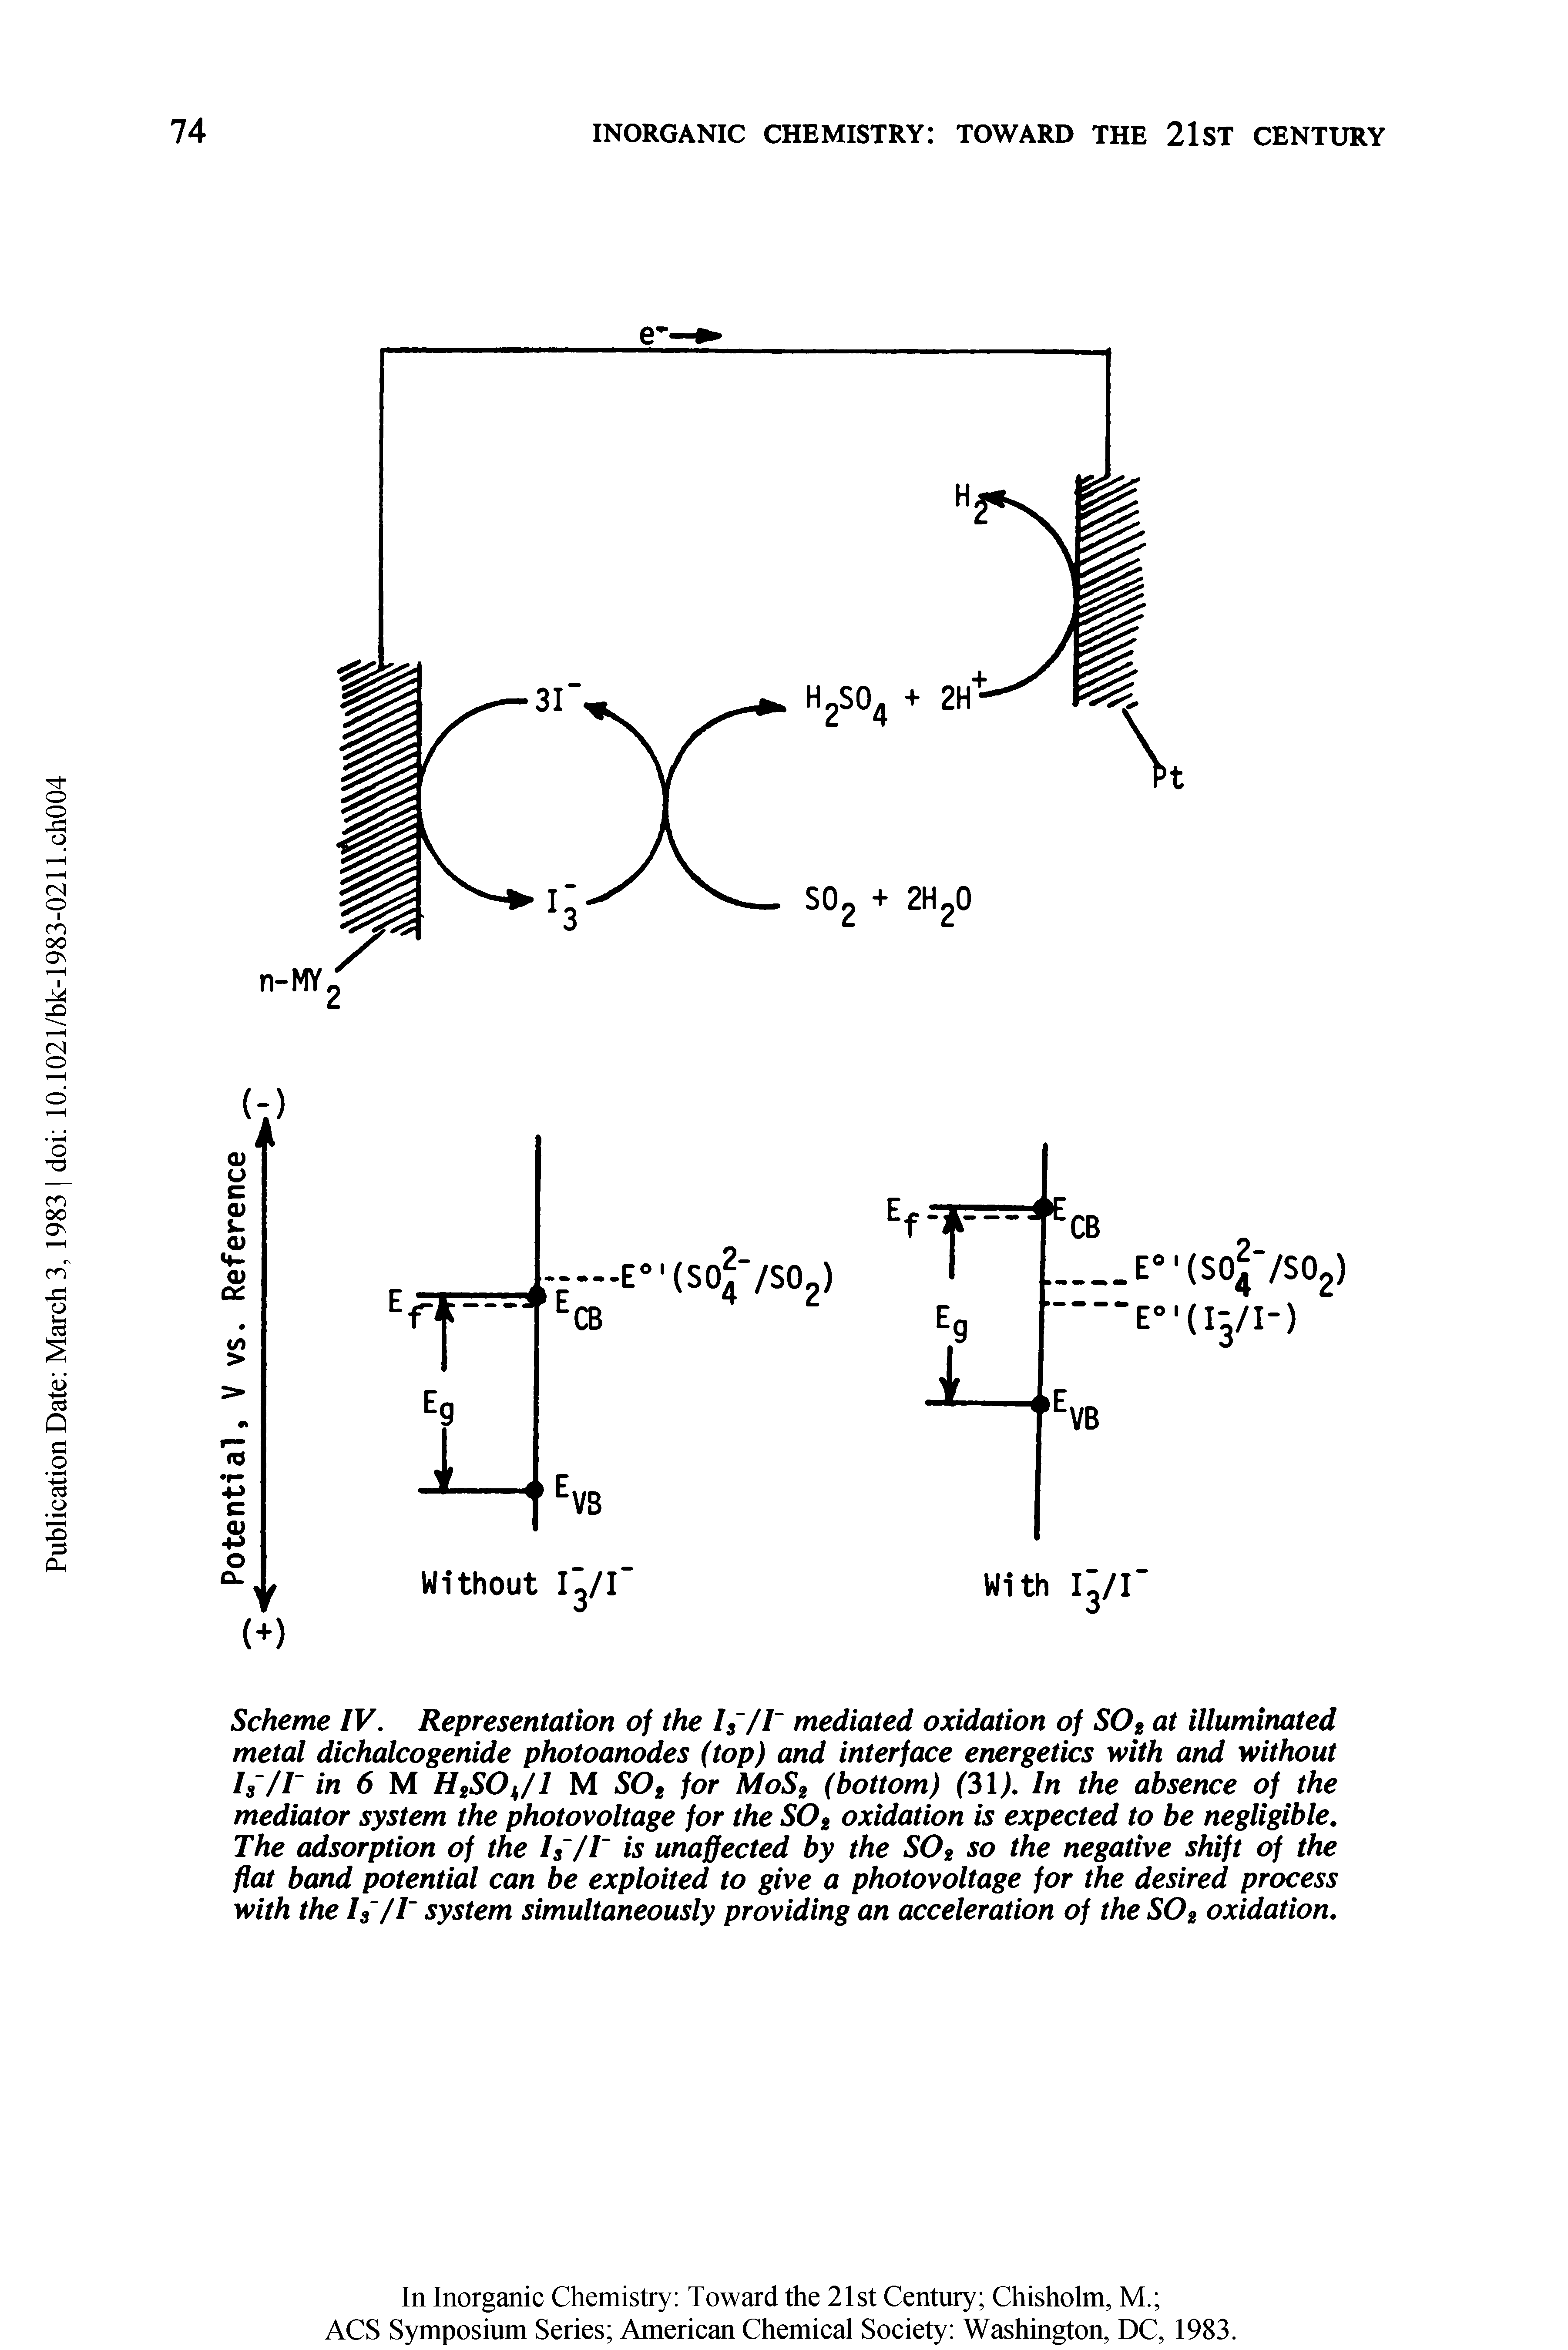 Scheme IV. Representation of the Is /T mediated oxidation of S02 at illuminated metal dichalcogenide photoanodes (top) and interface energetics with and without If/I in 6 M H2SOh/l M SOt for MoS2 (bottom) (31). In the absence of the mediator system the photovoltage for the S02 oxidation is expected to be negligible. The adsorption of the Is /T is unaffected by the S02 so the negative shift of the fiat band potential can be exploited to give a photovoltage for the desired process with the h /T system simultaneously providing an acceleration of the S02 oxidation.